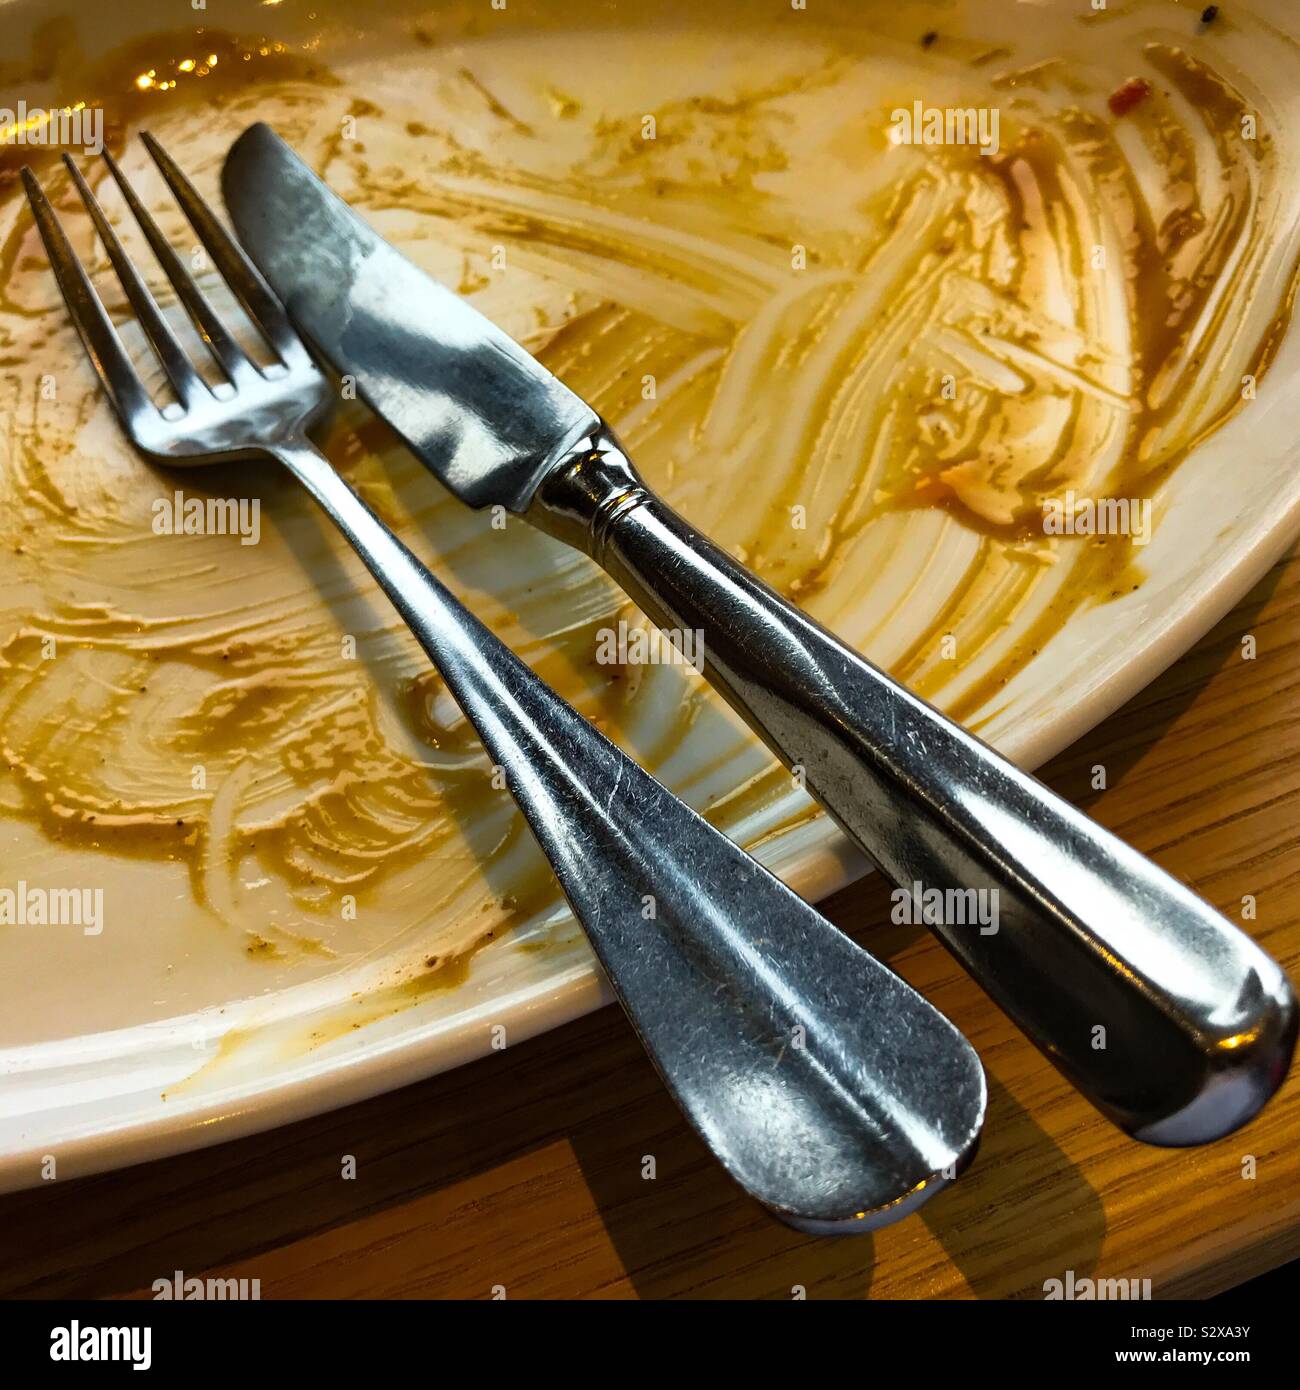 A finished eating empty plate with knife and fork placed on it Stock Photo